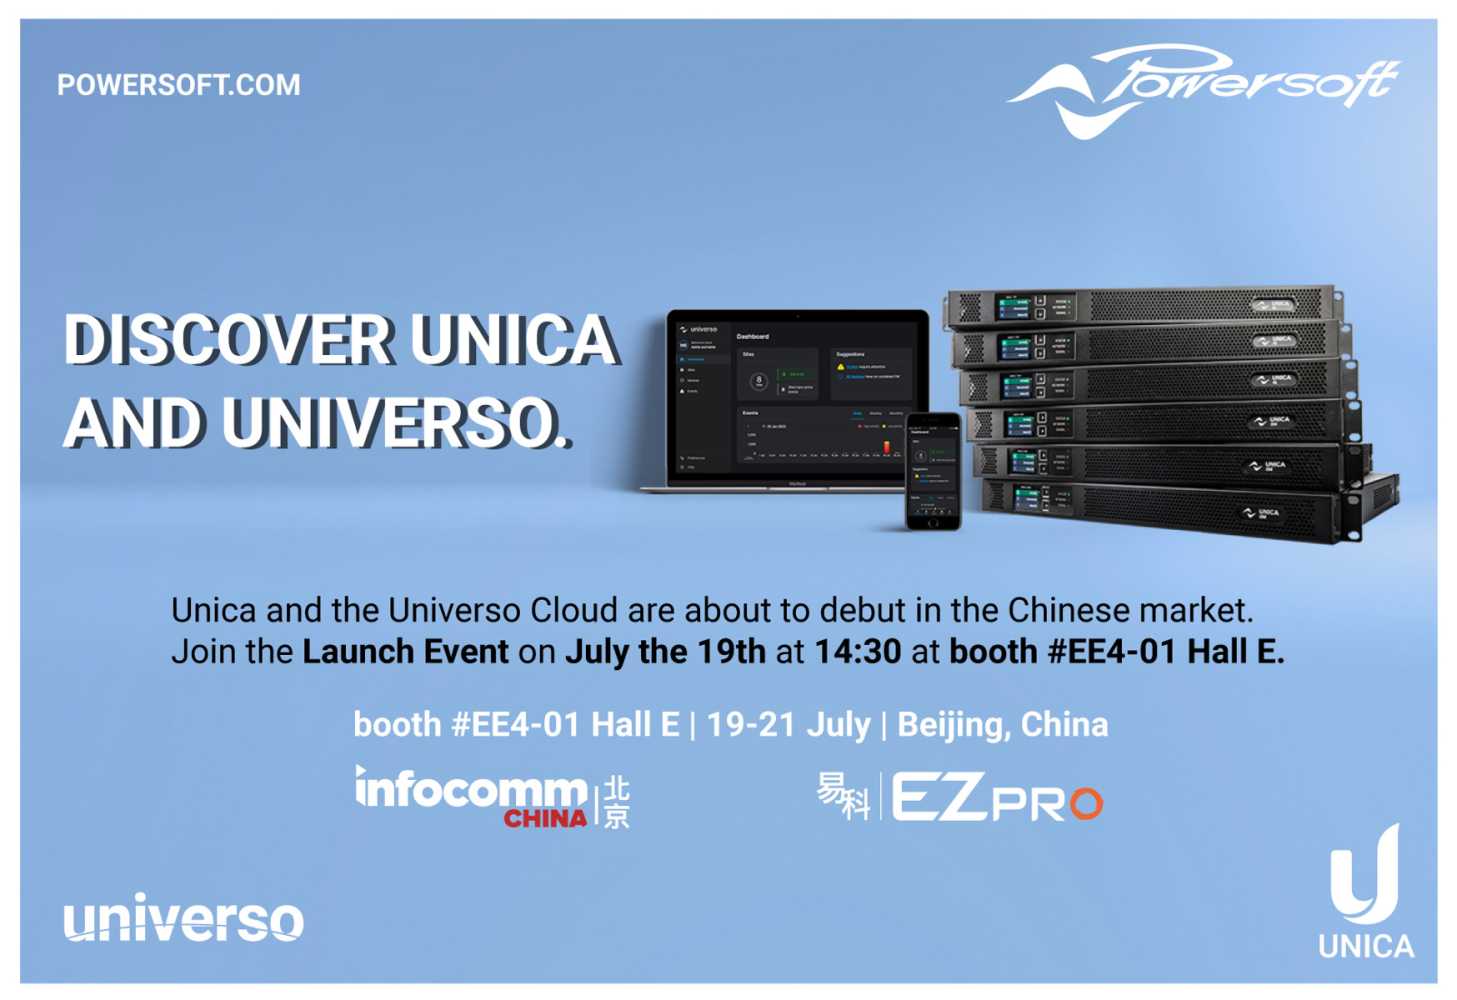 The new platform will be presented during a special event at InfoComm China